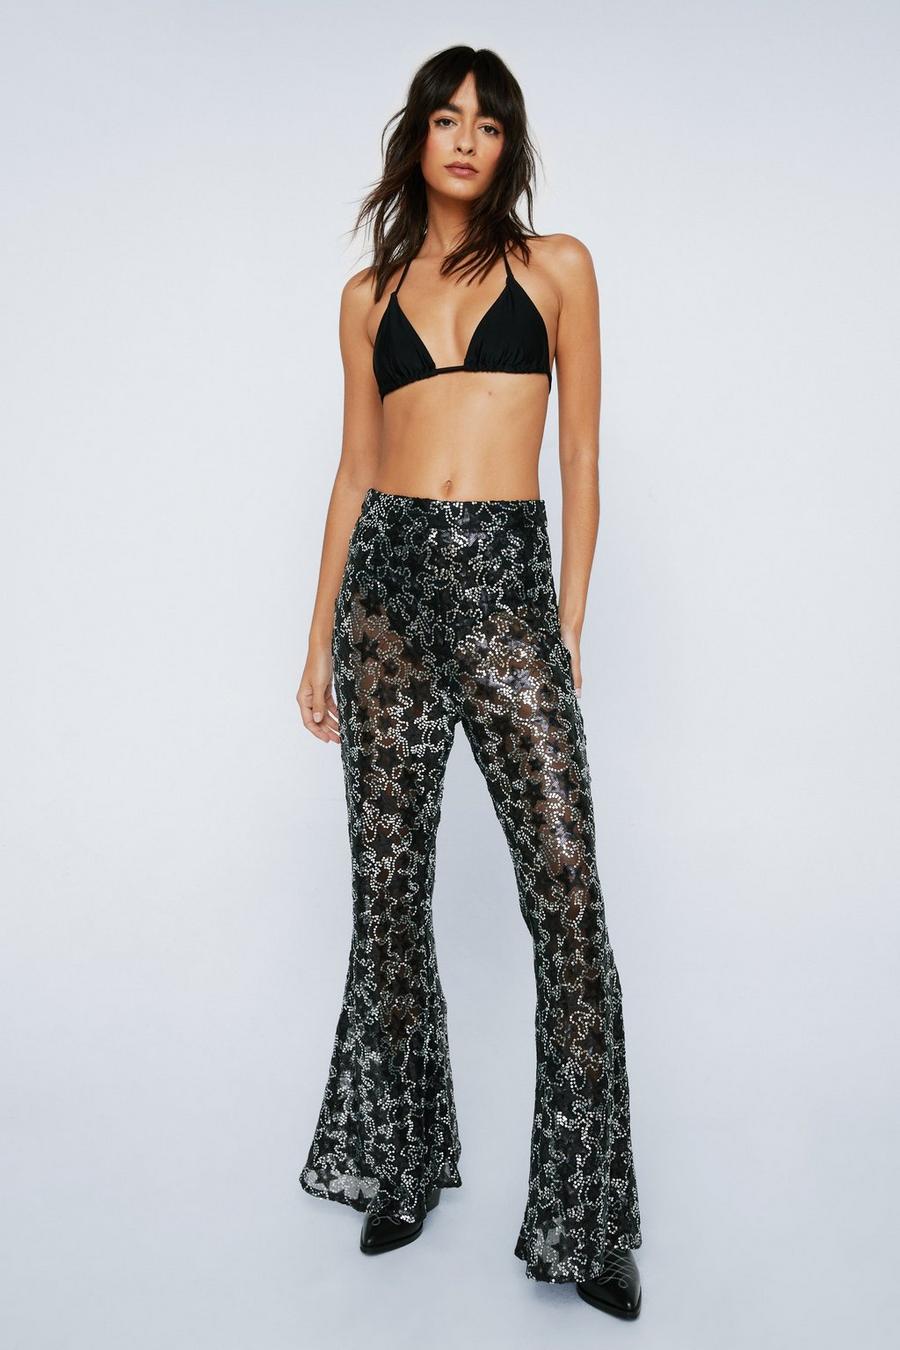 Star Print Sheer Sequin Trousers